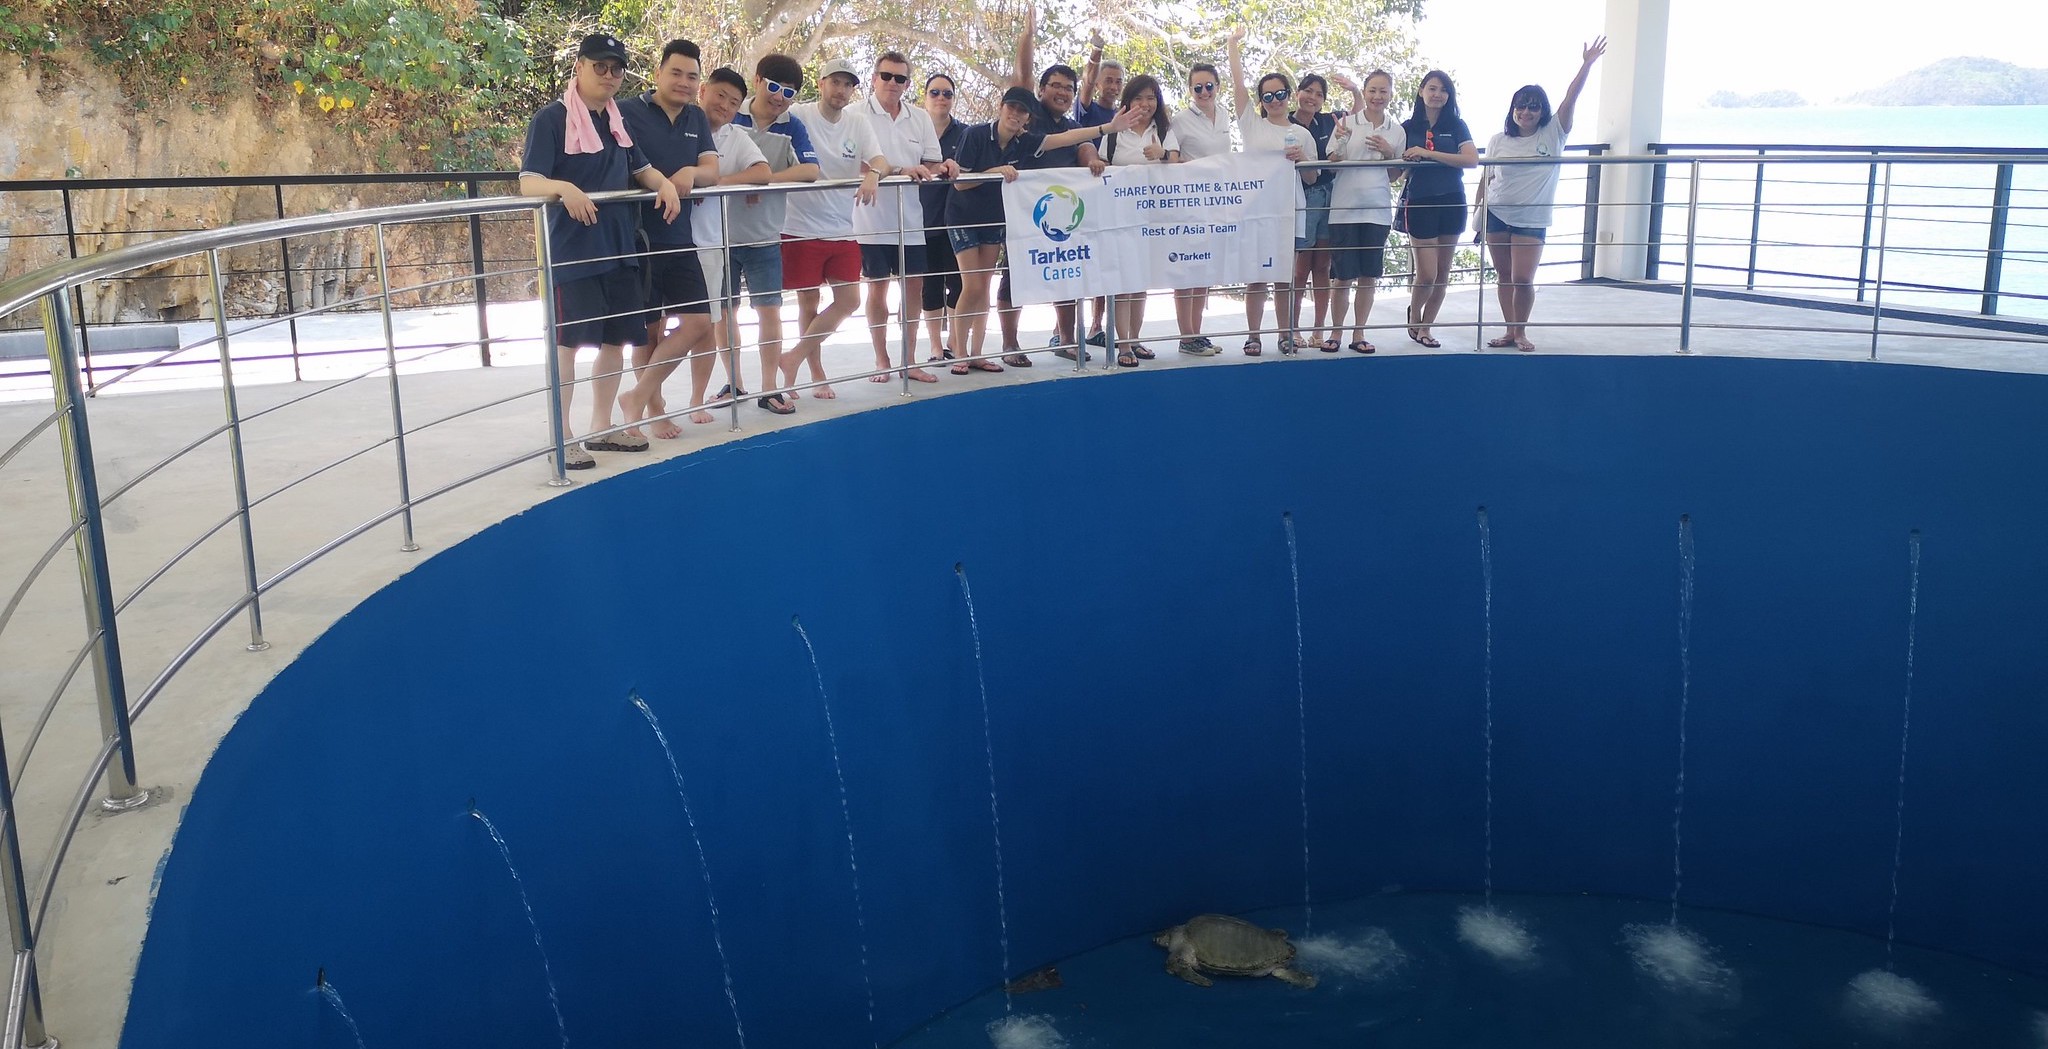 The Mangrove Planting Turtle Care event was a significant and impactful experience for Tarkett employees, blending corporate team building with environmental action